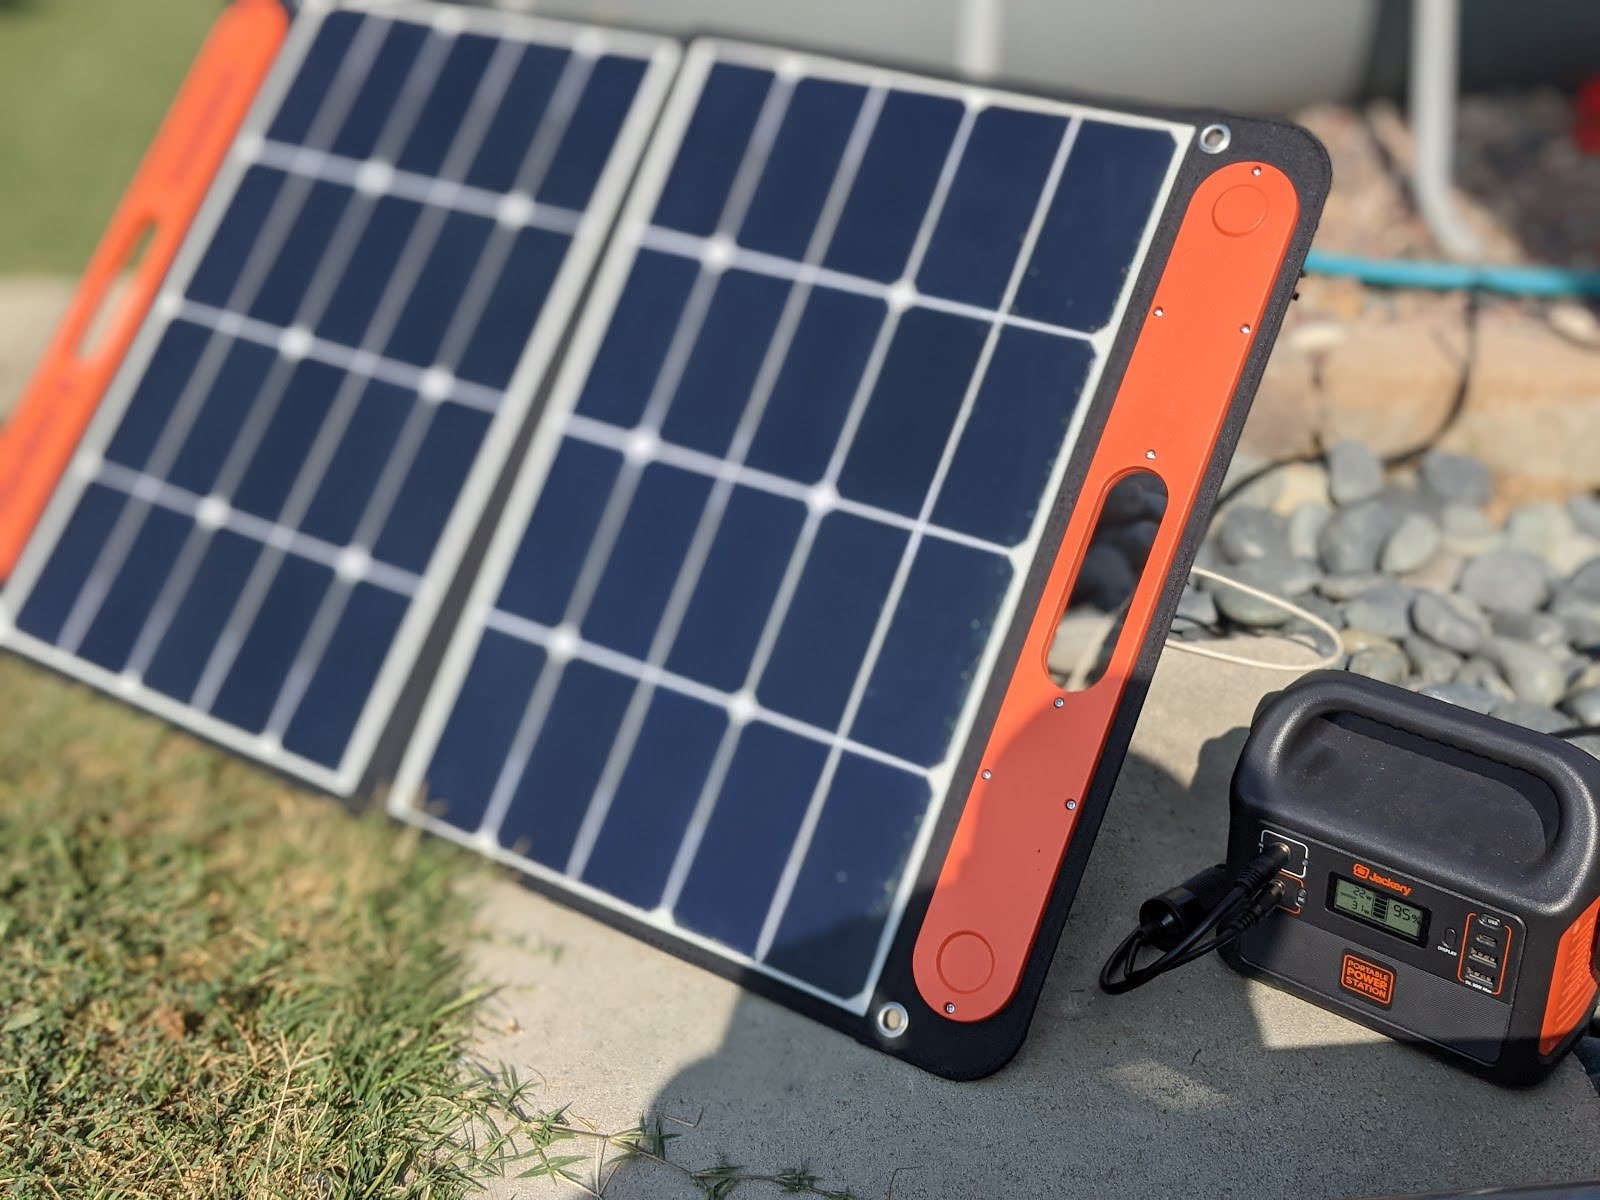 Testing Jackery solar panels 60 watts with portable fridge for camping